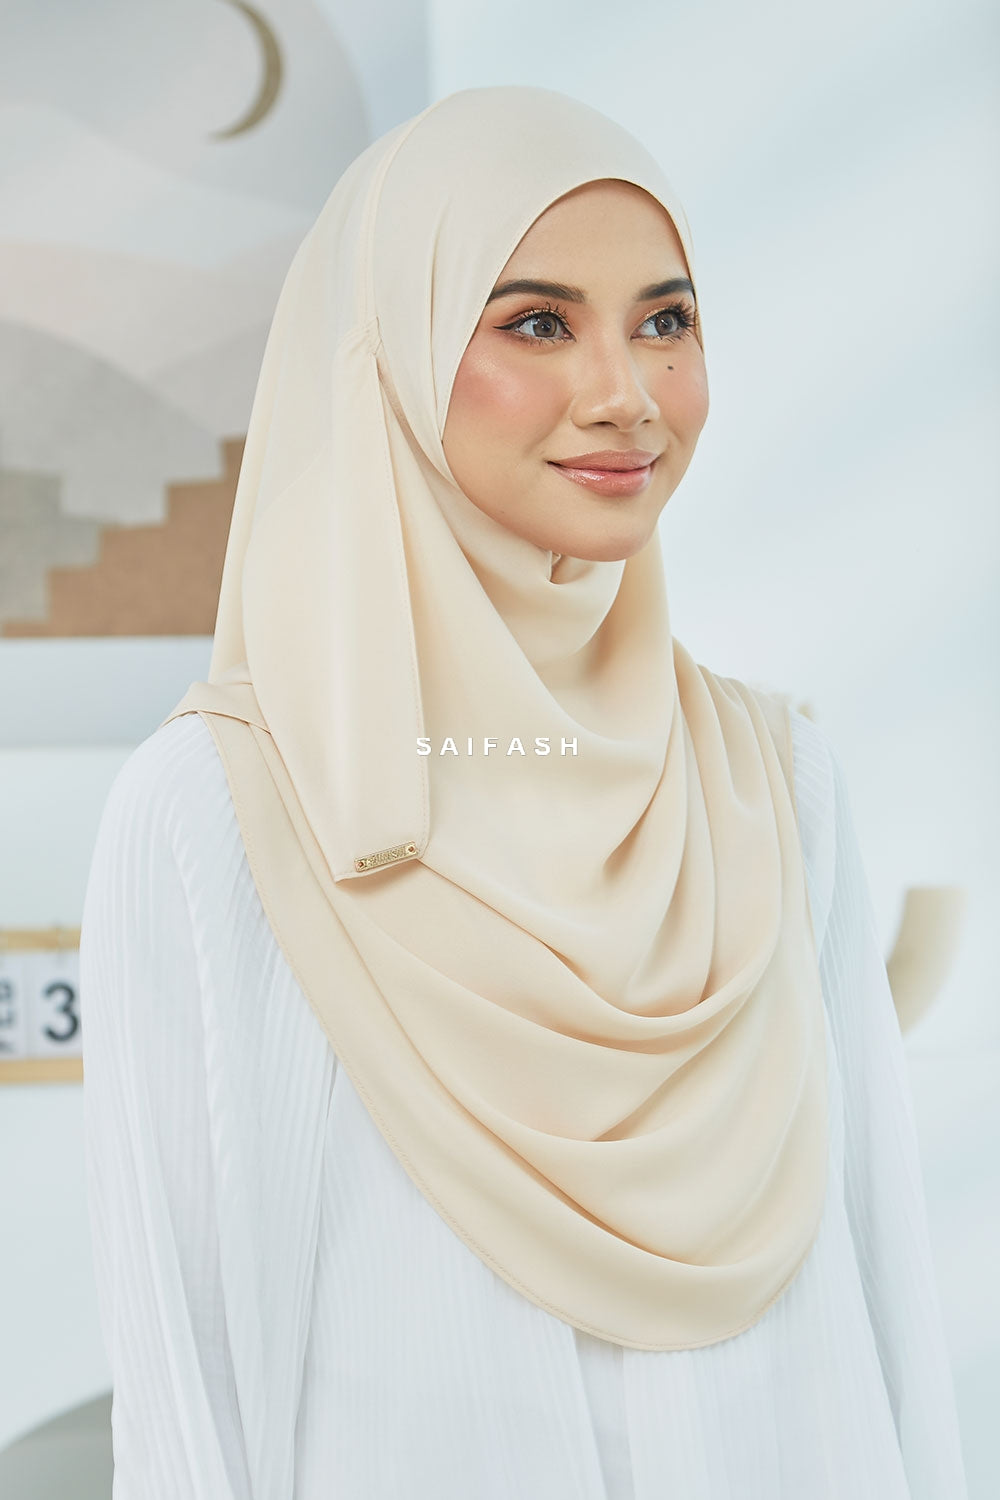 Aralyn Babes Instant Hijab in Ivory